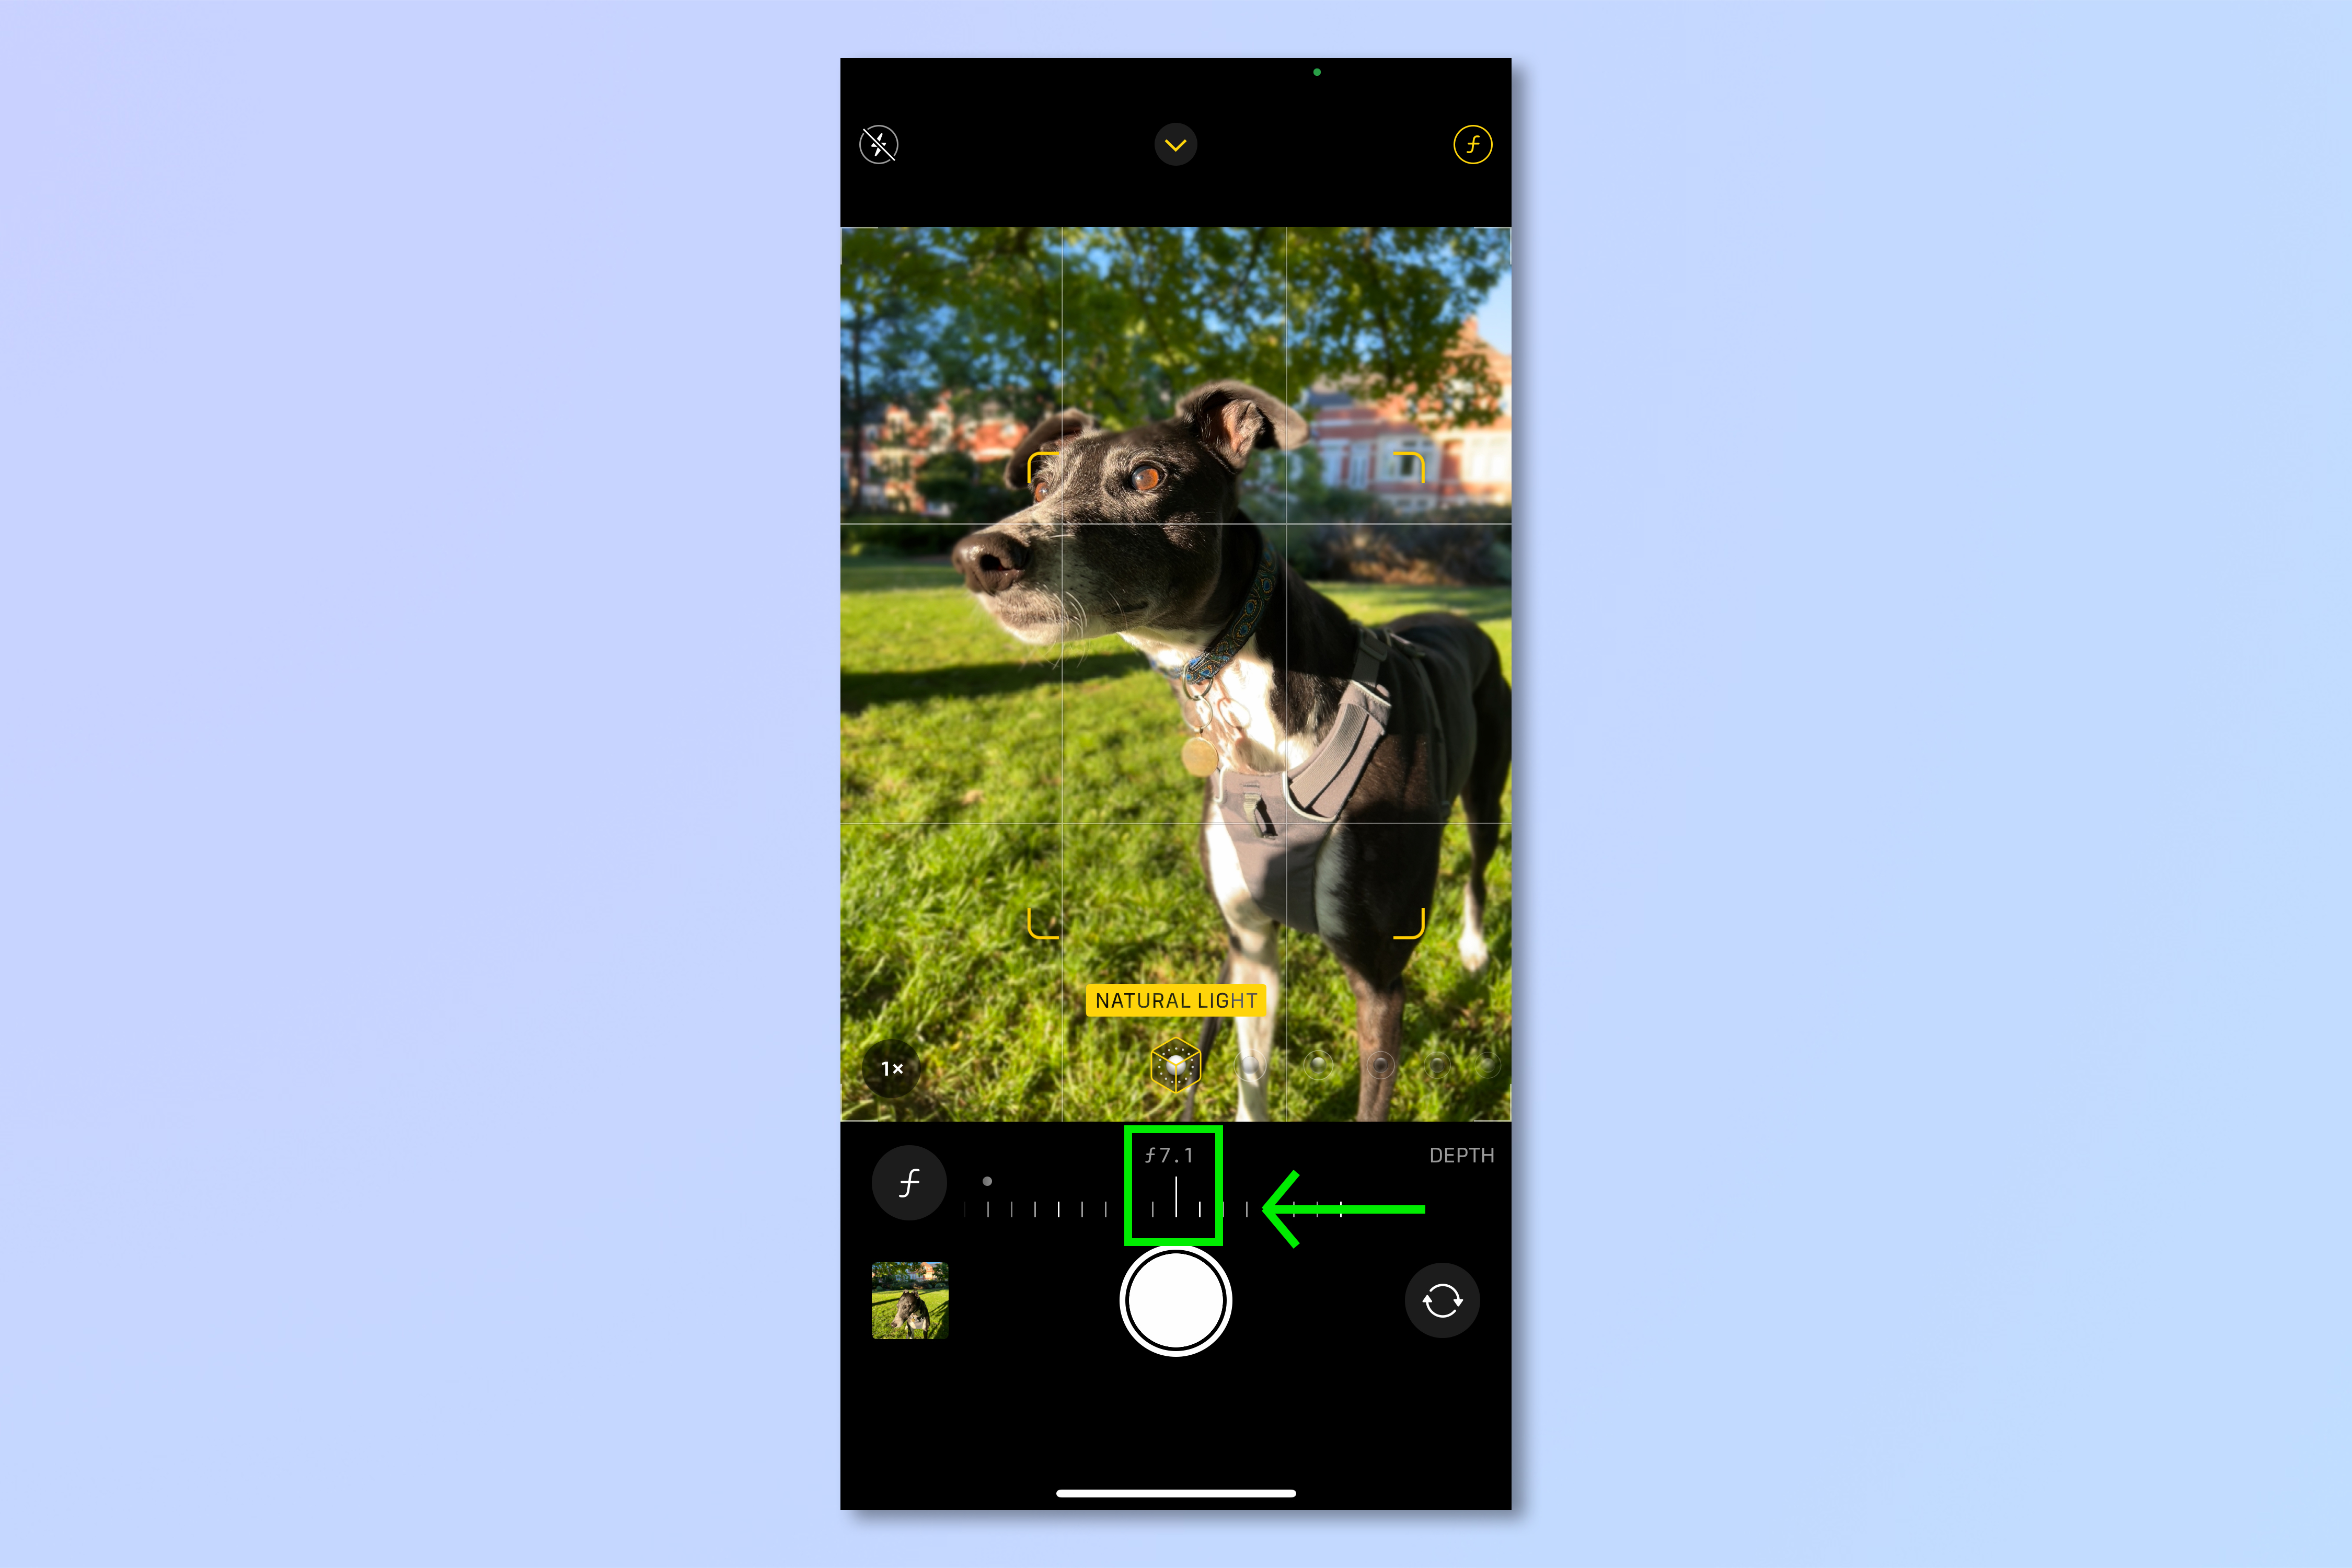 An iPhone screenshot of a grayhound pictured in the iPhone camera, demonstrating the steps required to blur the background of iPhone photos